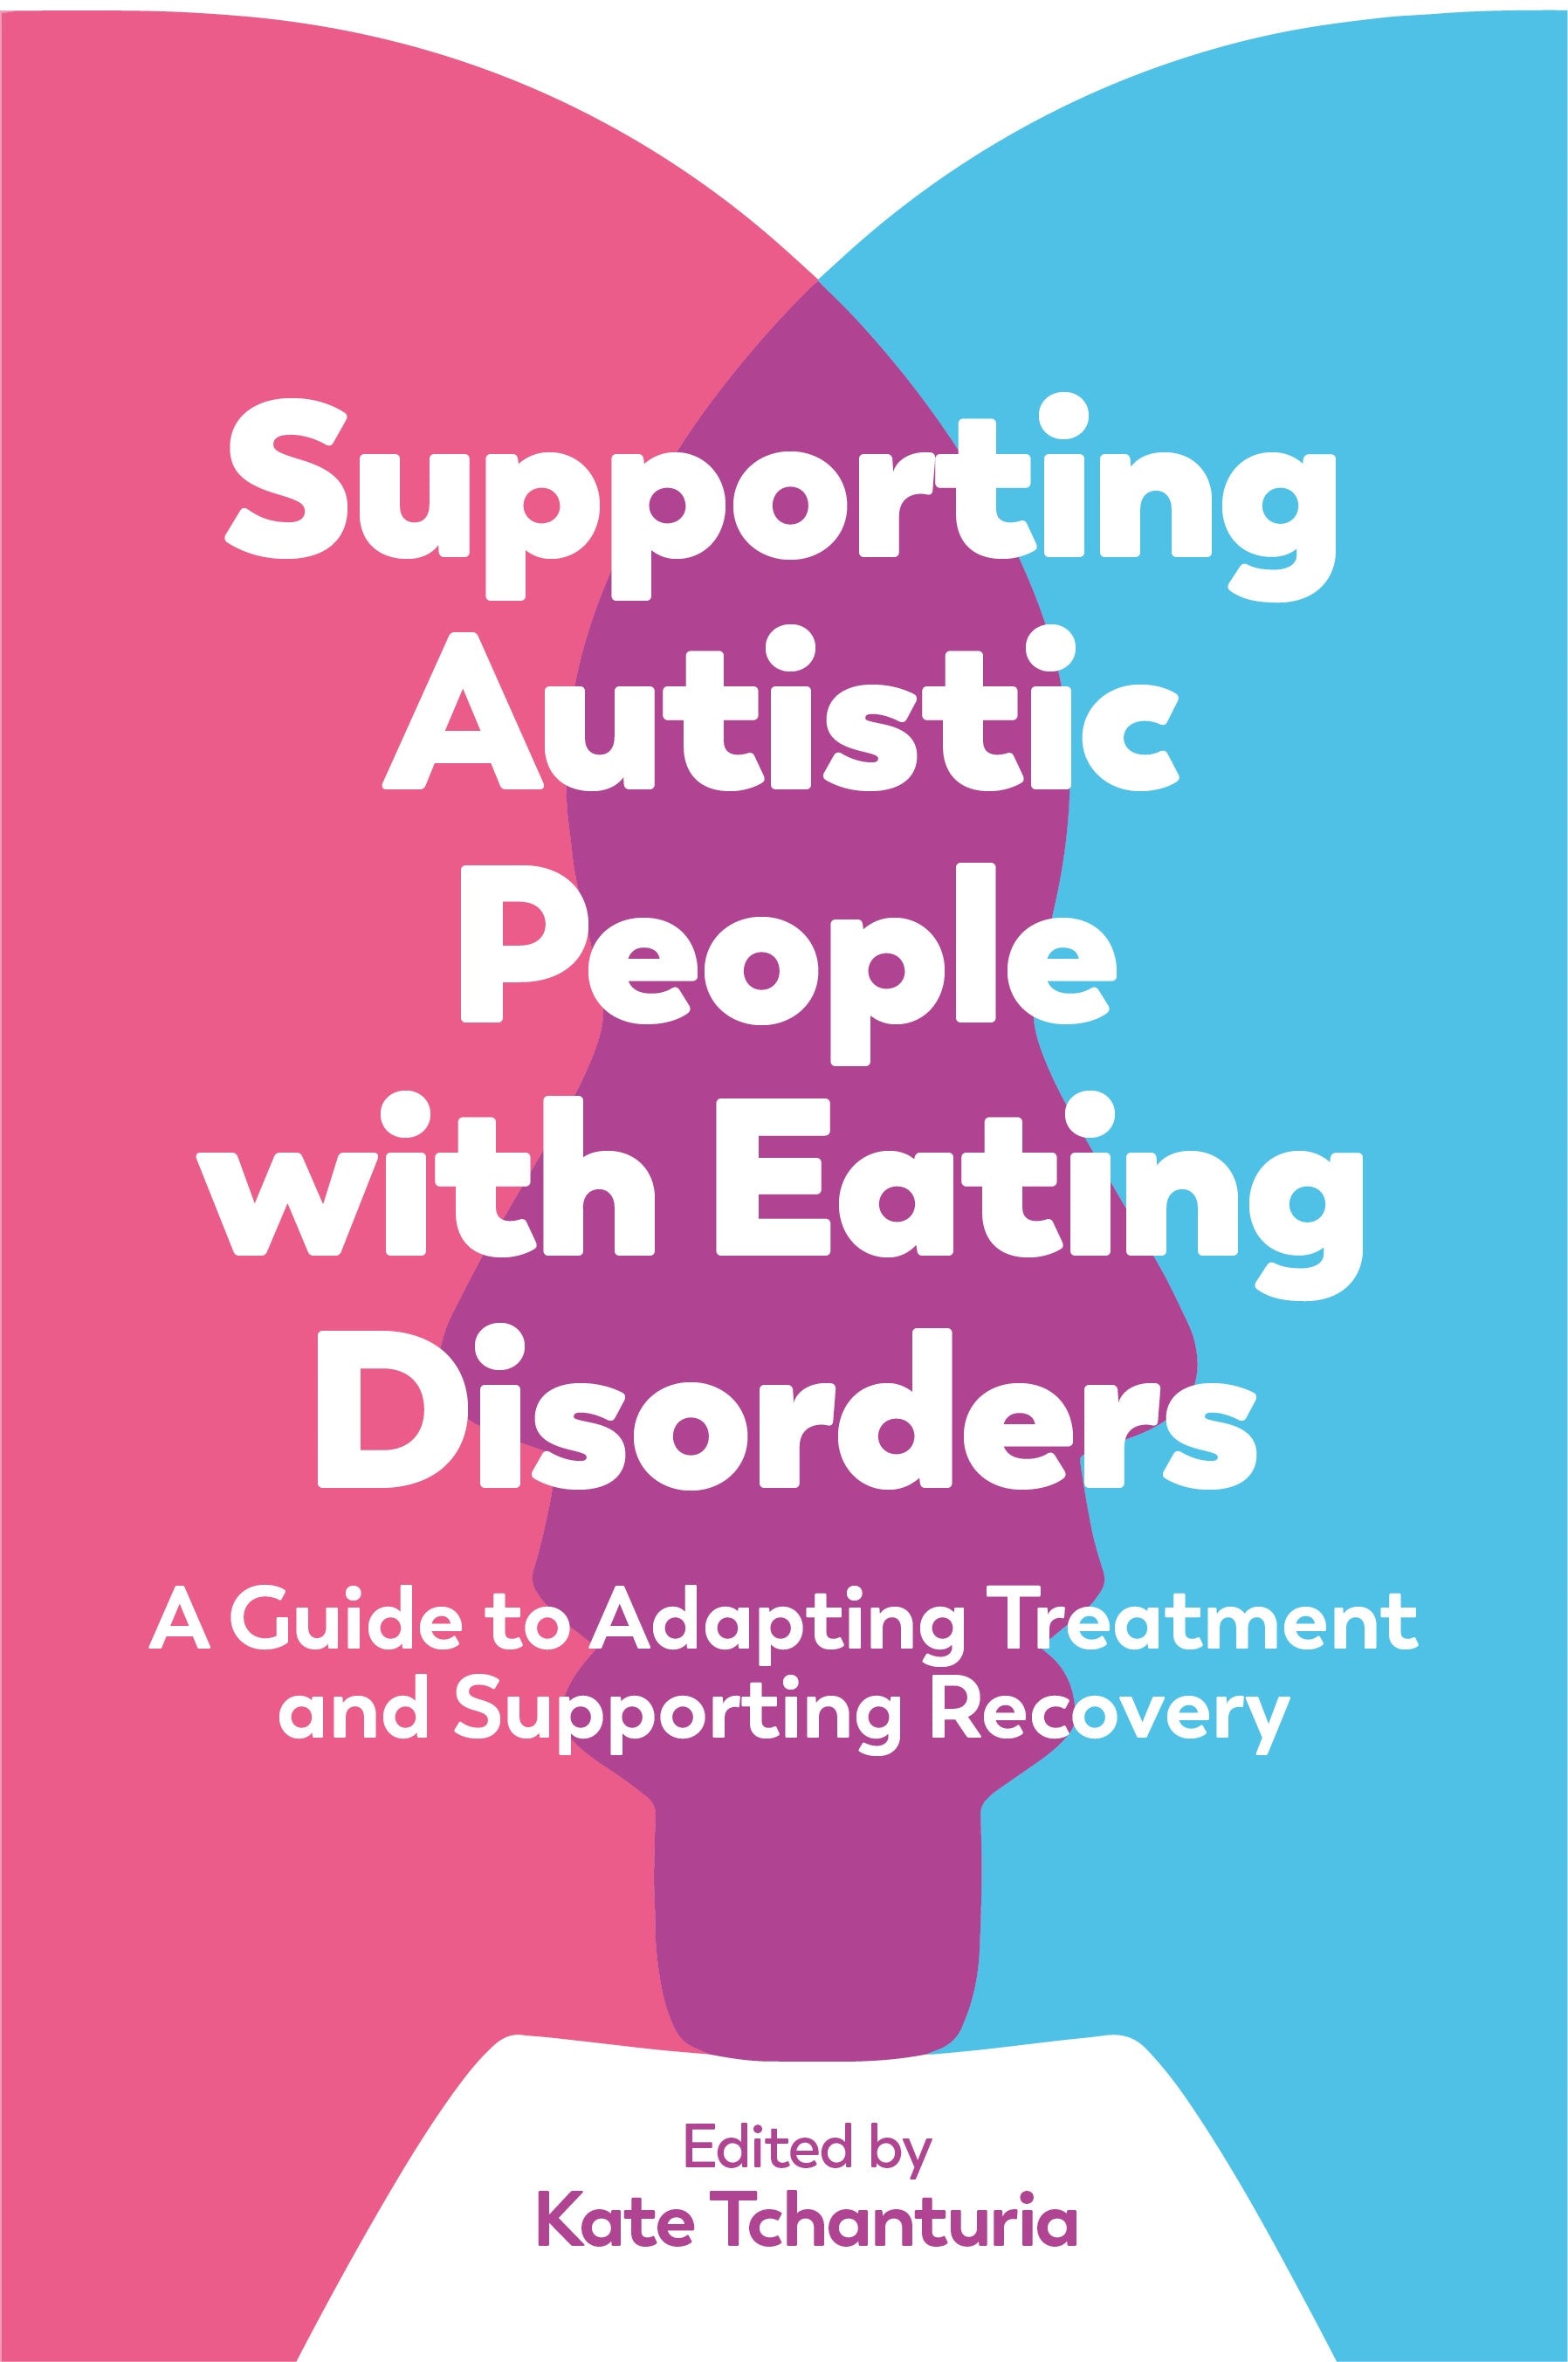 Supporting Autistic People with Eating Disorders by Kate Tchanturia, No Author Listed